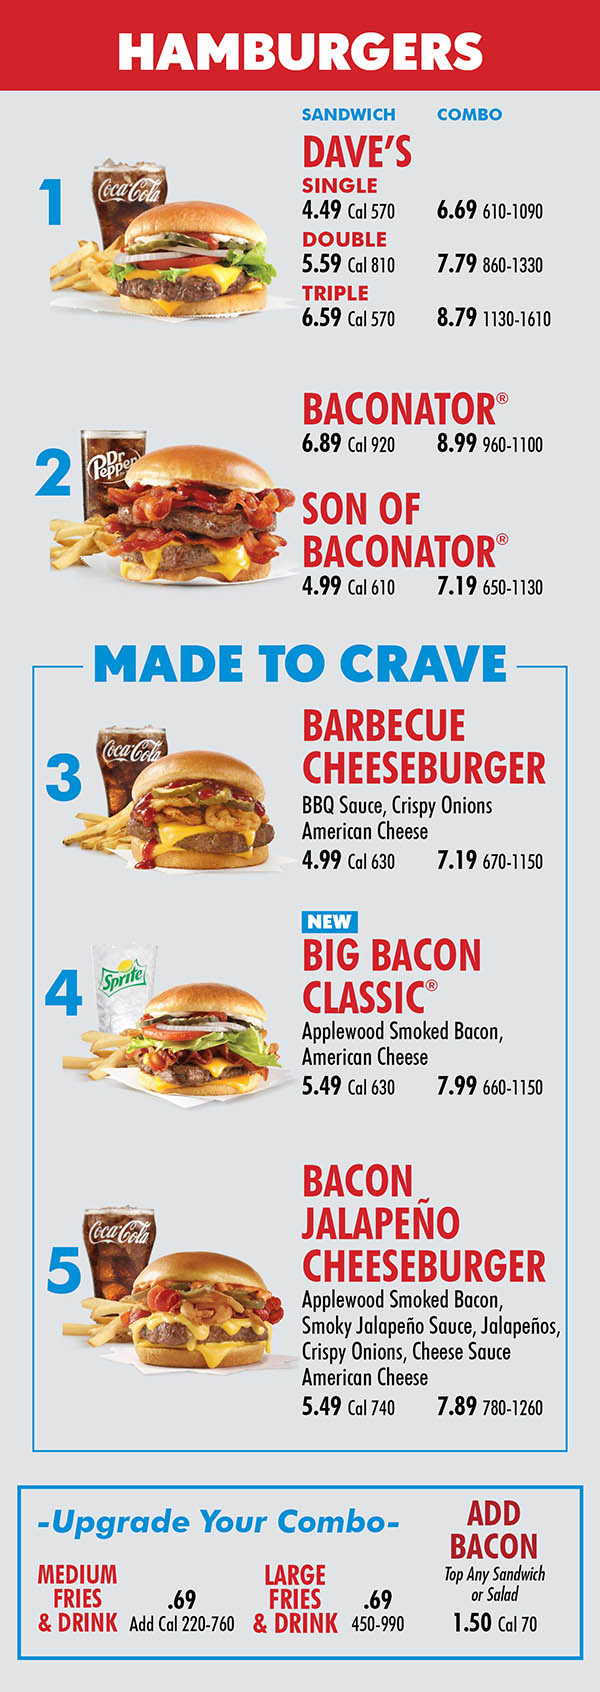 Wendy's Menu S 84th St Lincoln NE Page 1
HAMBURGERS
SANDWICH COMBO
DAVE’S
SINGLE
4.49 Cal 570 6.69 610-1090
DOUBLE
5.59 Cal 810 7.79 860-1330
TRIPLE
6.59 Cal 570 8.79 1130-1610
BACONATOR®
6.89 Cal 920 8.99 960-1100
SON OF
BACONATOR®
4.99 Cal 610 7.19 650-1130
BARBECUE
CHEESEBURGER
BBQ Sauce, Crispy Onions
American Cheese
4.99 Cal 630 7.19 670-1150
BIG BACON
CLASSIC®
Applewood Smoked Bacon,
American Cheese
5.49 Cal 630 7.99 660-1150
BACON
JALAPEÑO
CHEESEBURGER
Applewood Smoked Bacon,
Smoky Jalapeño Sauce, Jalapeños,
Crispy Onions, Cheese Sauce
American Cheese
5.49 Cal 740 7.89 780-1260
1
2
MADE TO CRAVE
3
4
5
-Upgrade Your Combo-
ADD
BACON
MEDIUM
FRIES
& DRINK
LARGE
FRIES
& DRINK
.69
Add Cal 220-760
.69
450-990
Top Any Sandwich or Salad
1.50 Cal 70